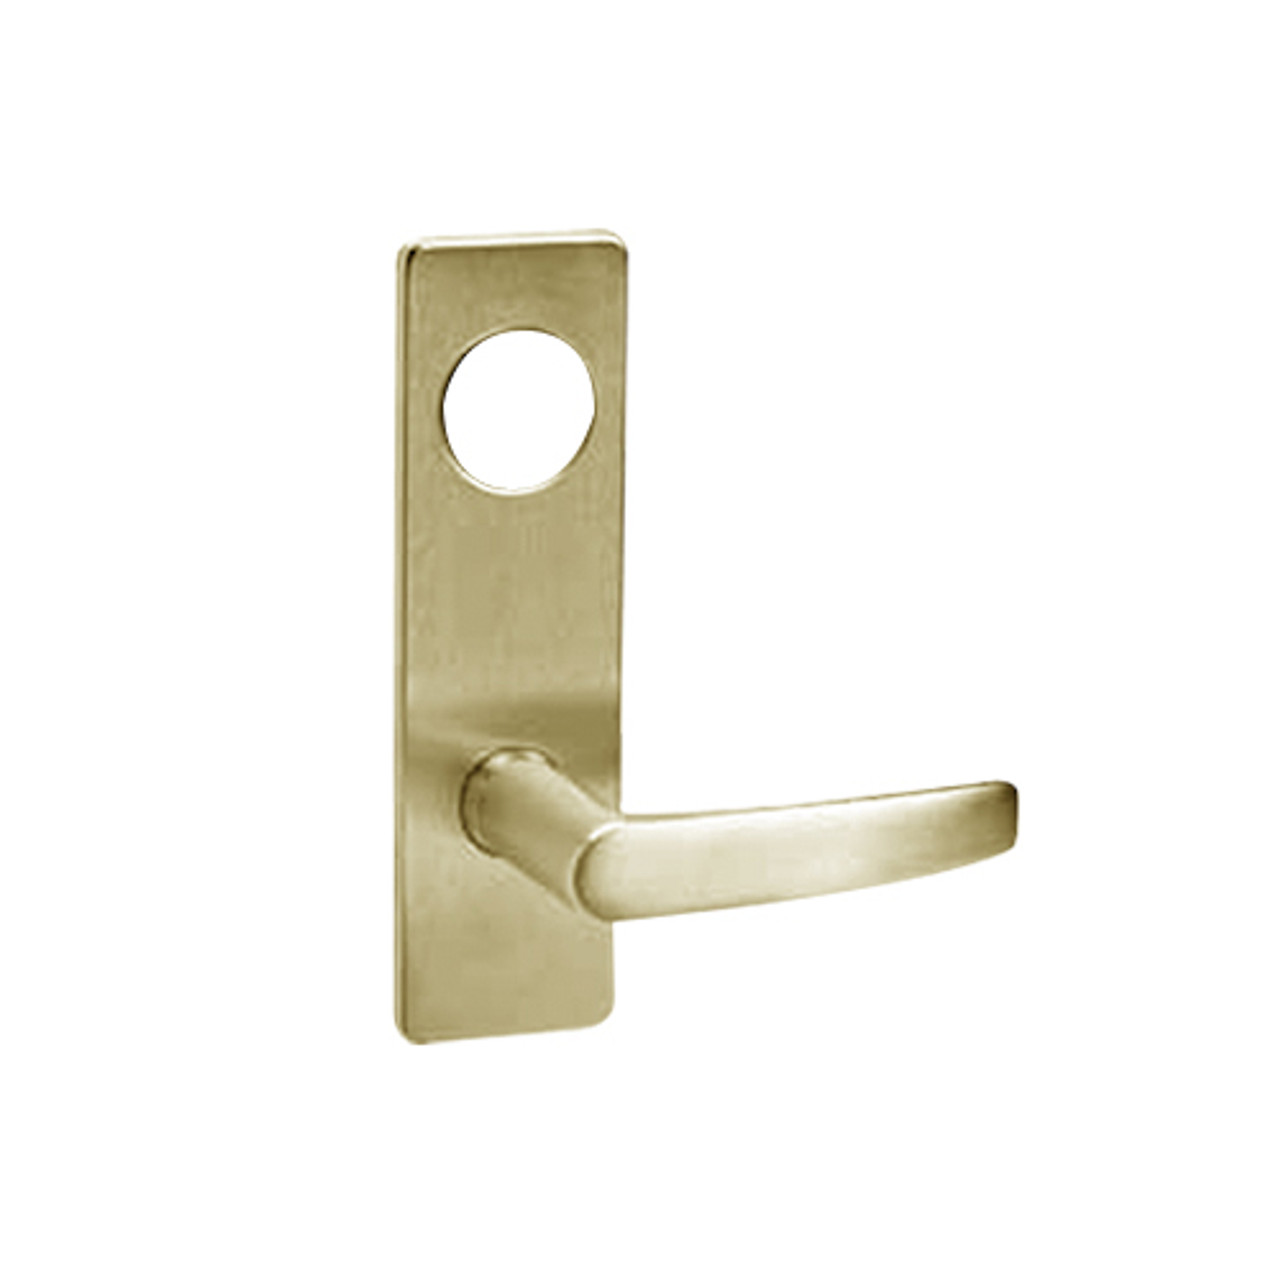 ML2042-ASR-606-LC Corbin Russwin ML2000 Series Mortise Entrance Locksets with Armstrong Lever in Satin Brass